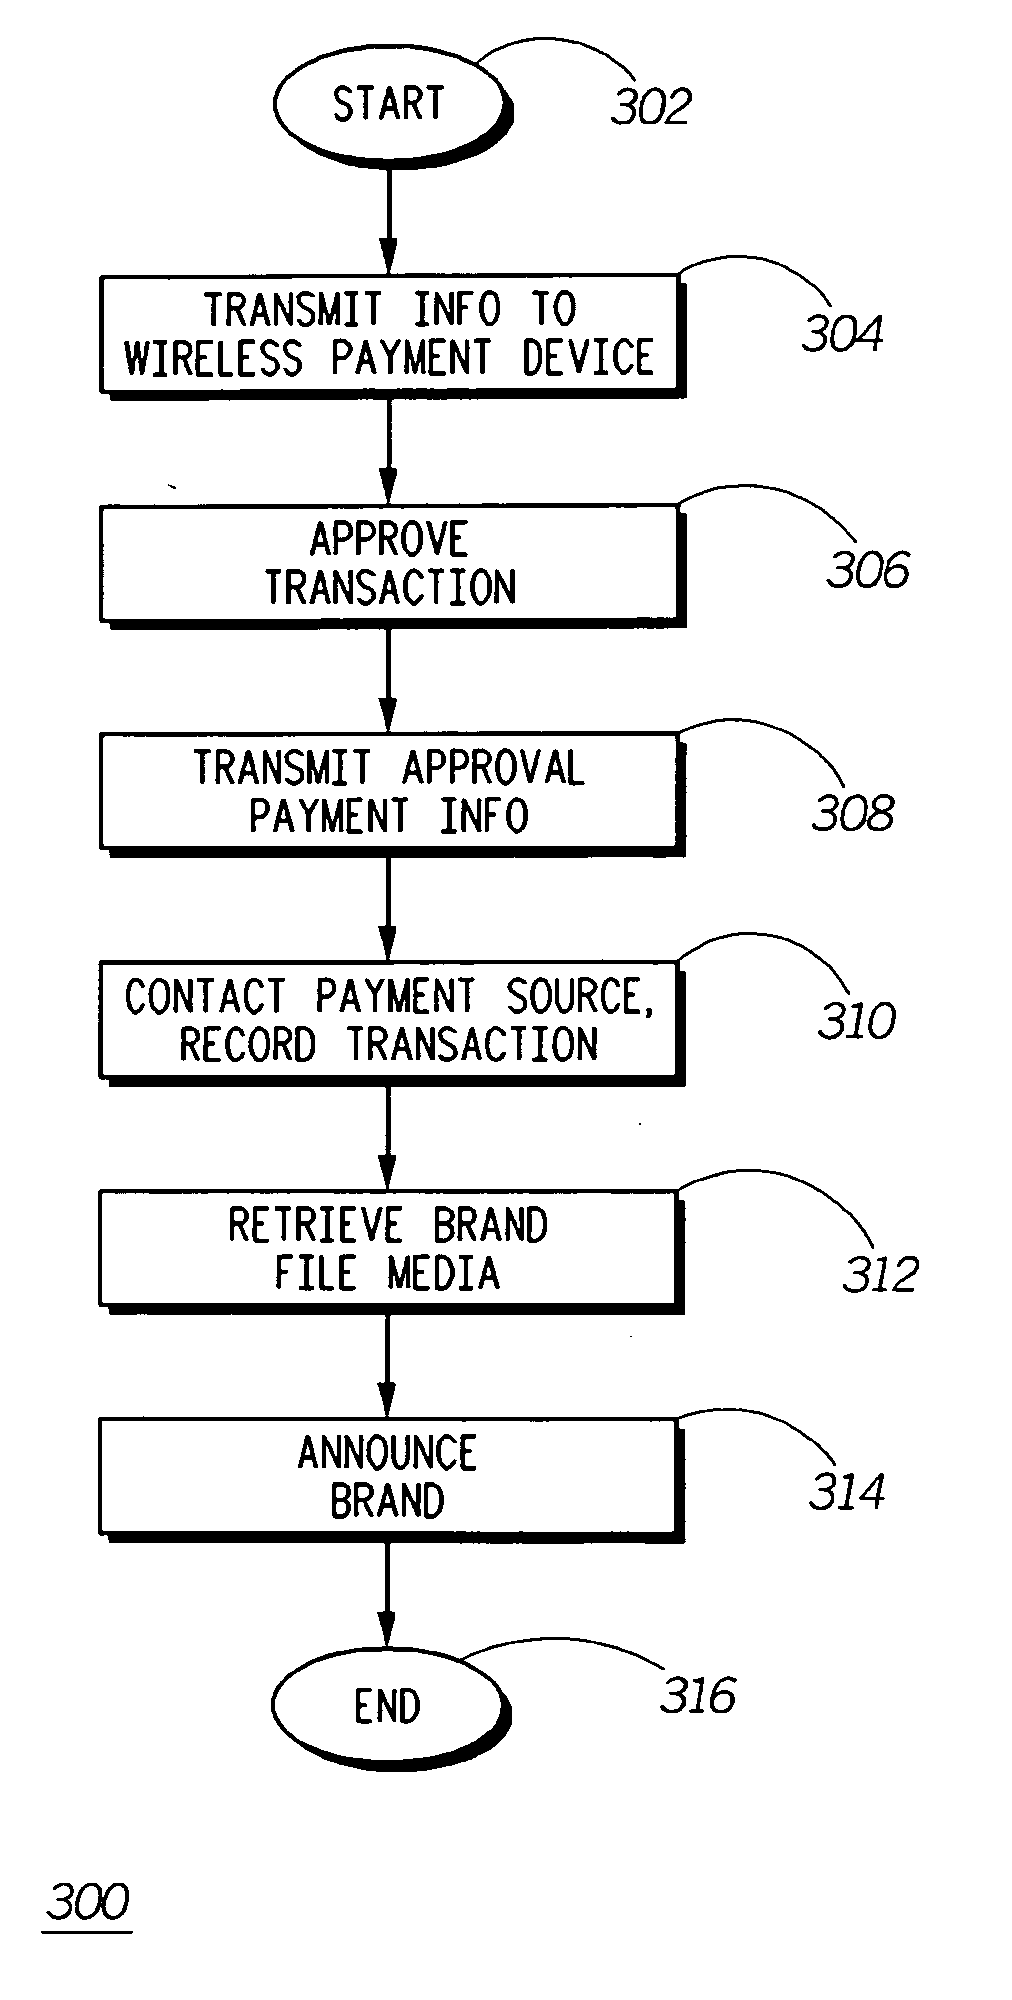 Payment brand announcement at a wireless payment point of sale device